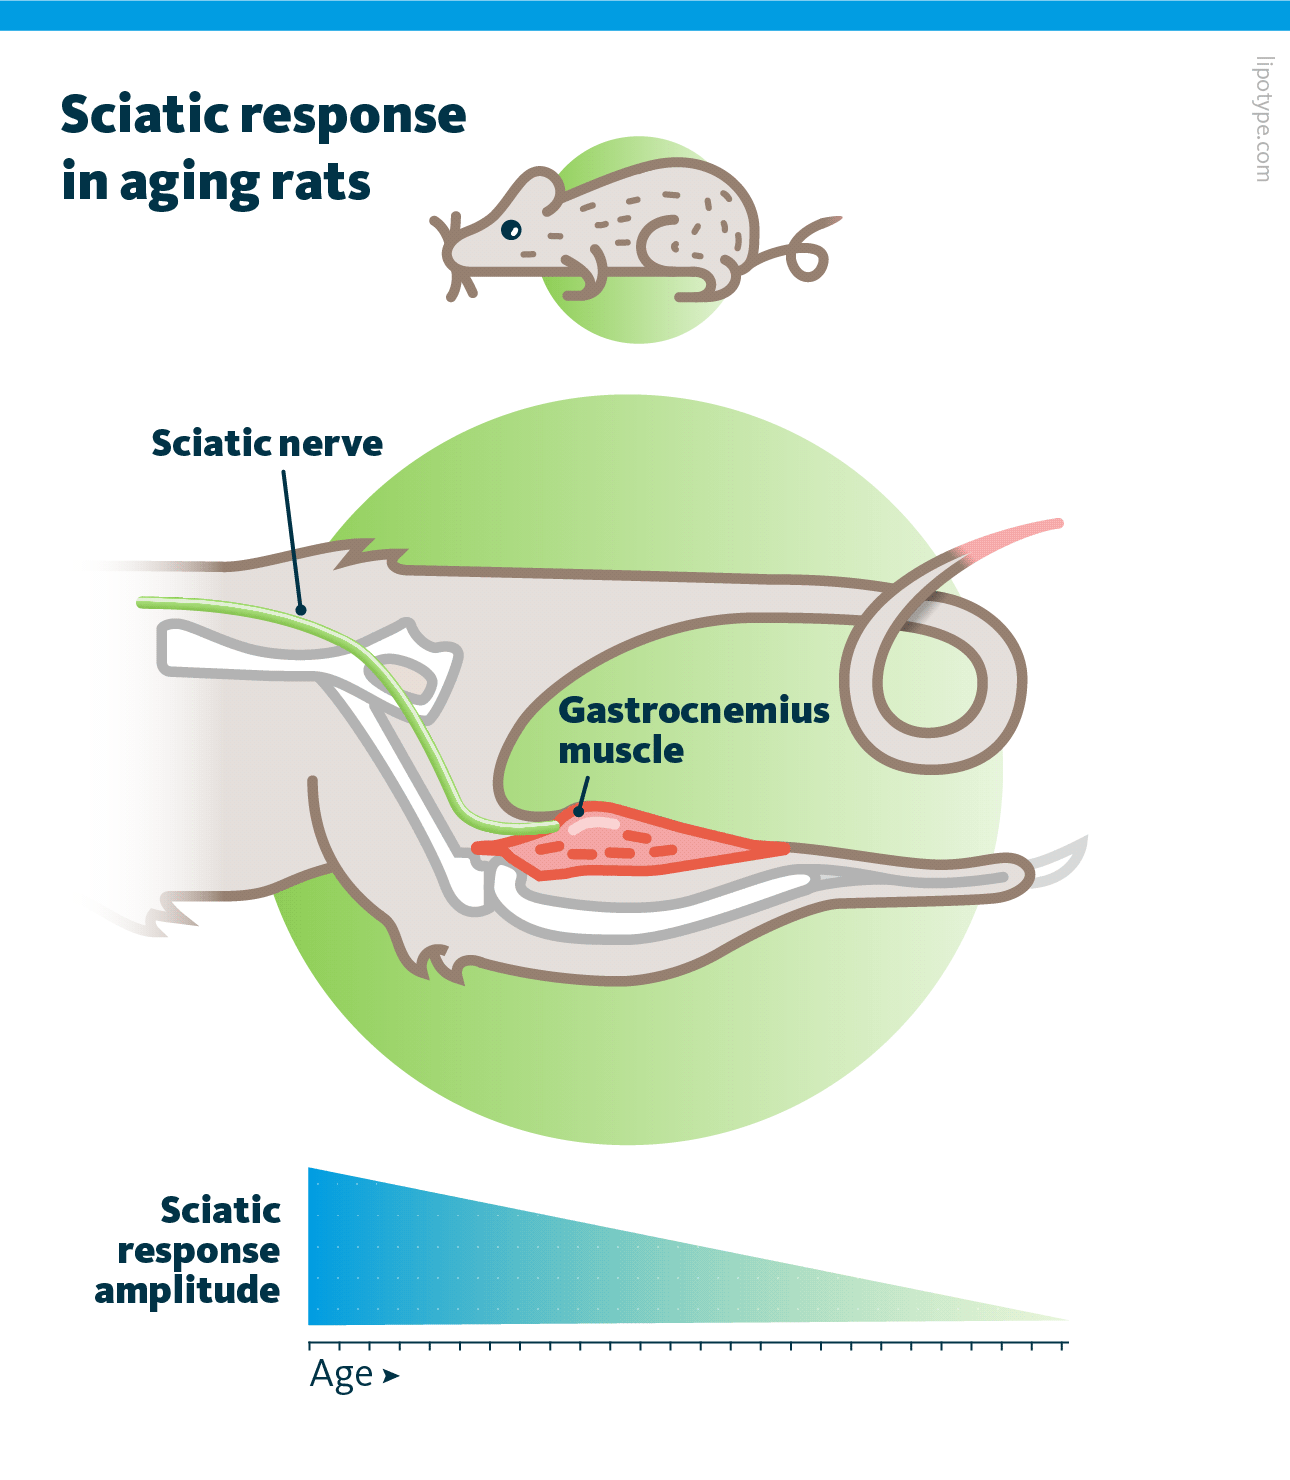 An infographic depicting sciatic response that declines in aging mice.